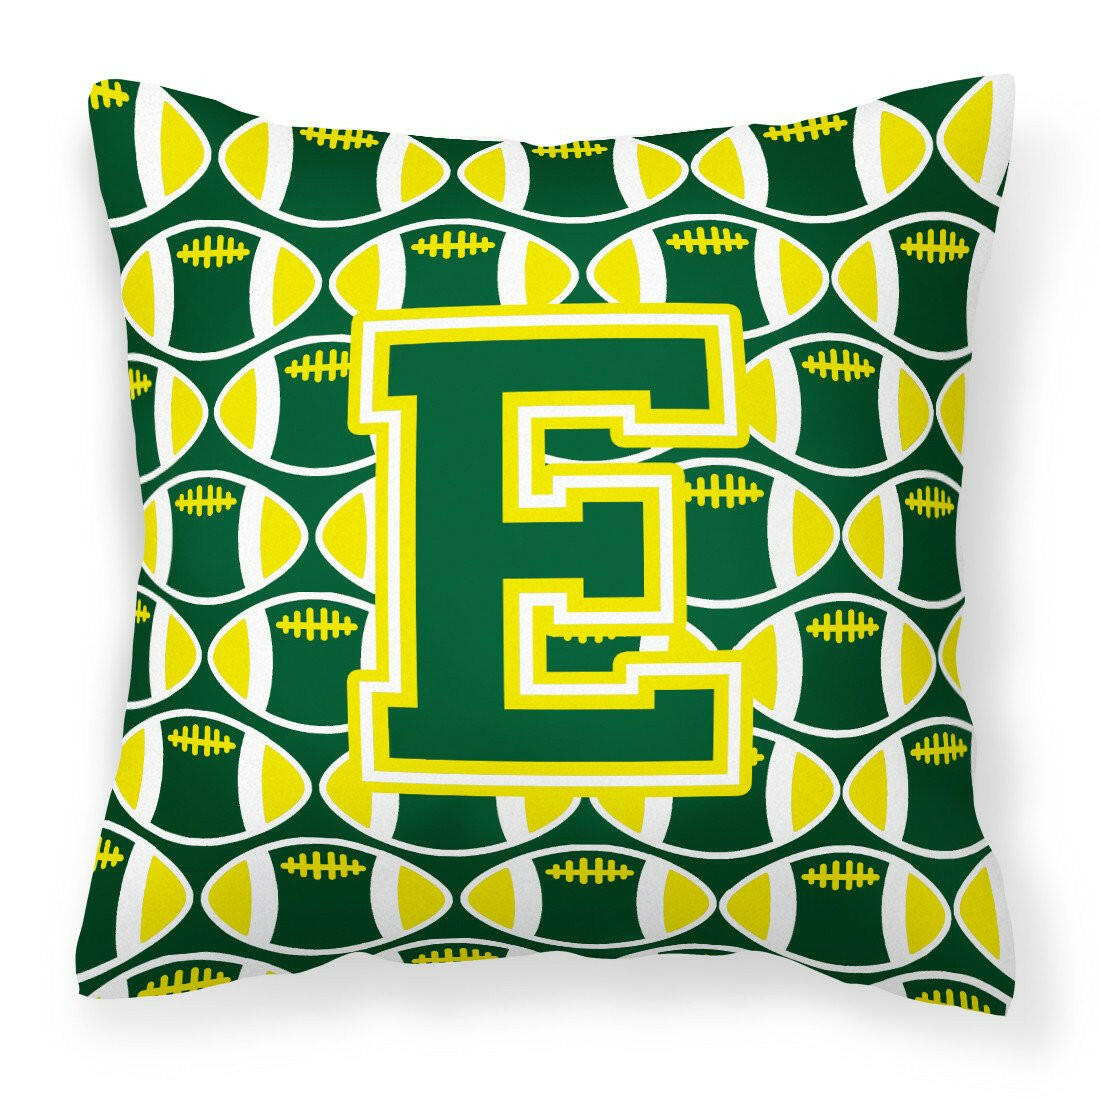 Letter E Football Green and Yellow Fabric Decorative Pillow CJ1075-EPW1414 by Caroline's Treasures